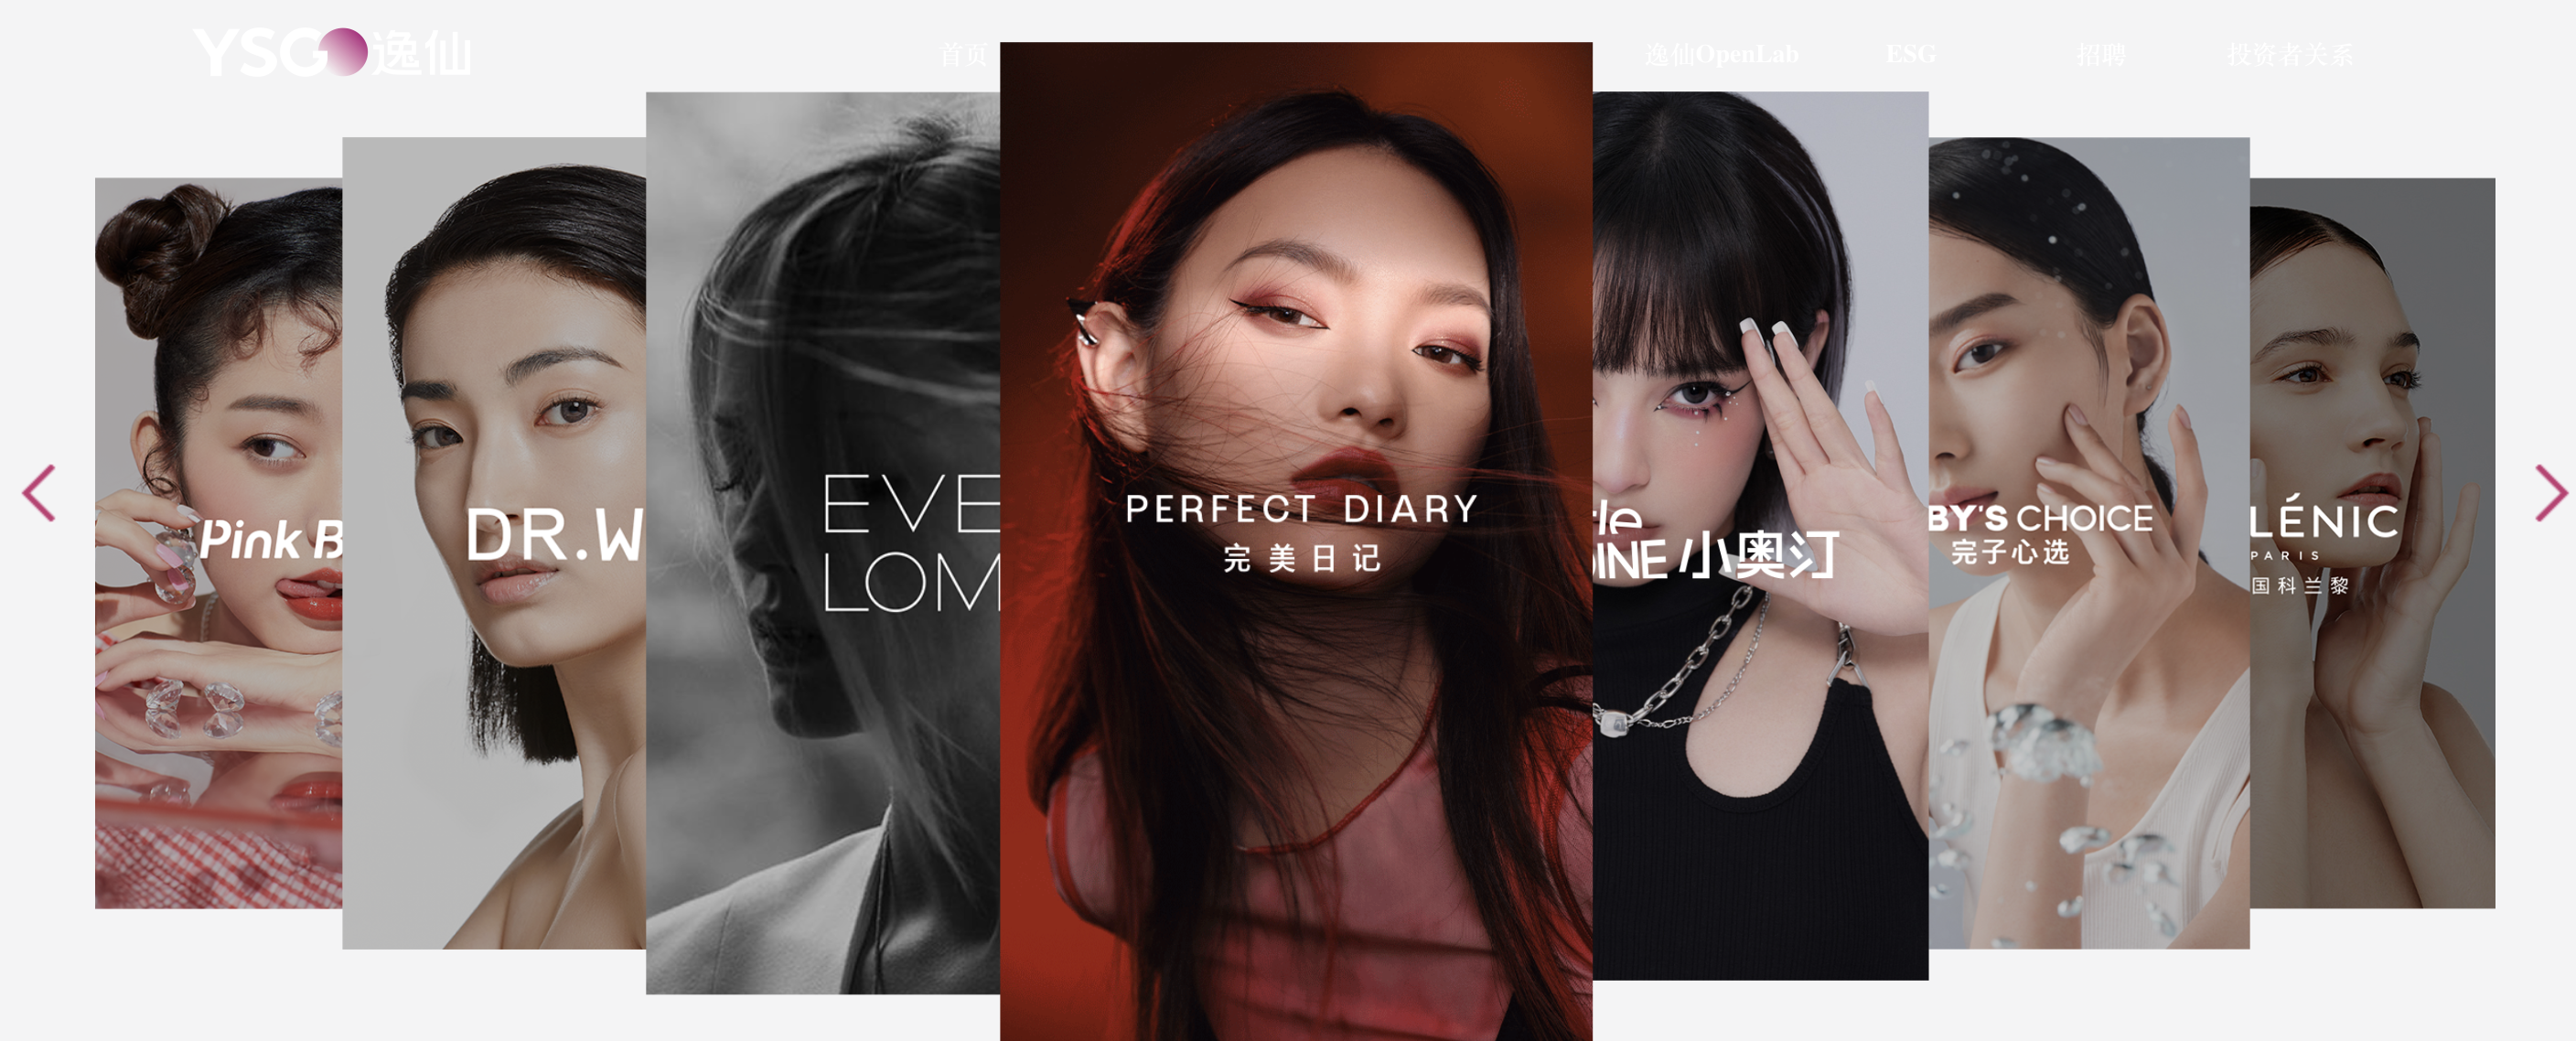 Perfect Diary’s Parent Company, Yatsen Holding, Achieved Profitability in the Last Quarter and Hired Former Vice President of R&D for Estée Lauder Asia Pacific as Chief Scientific Officer